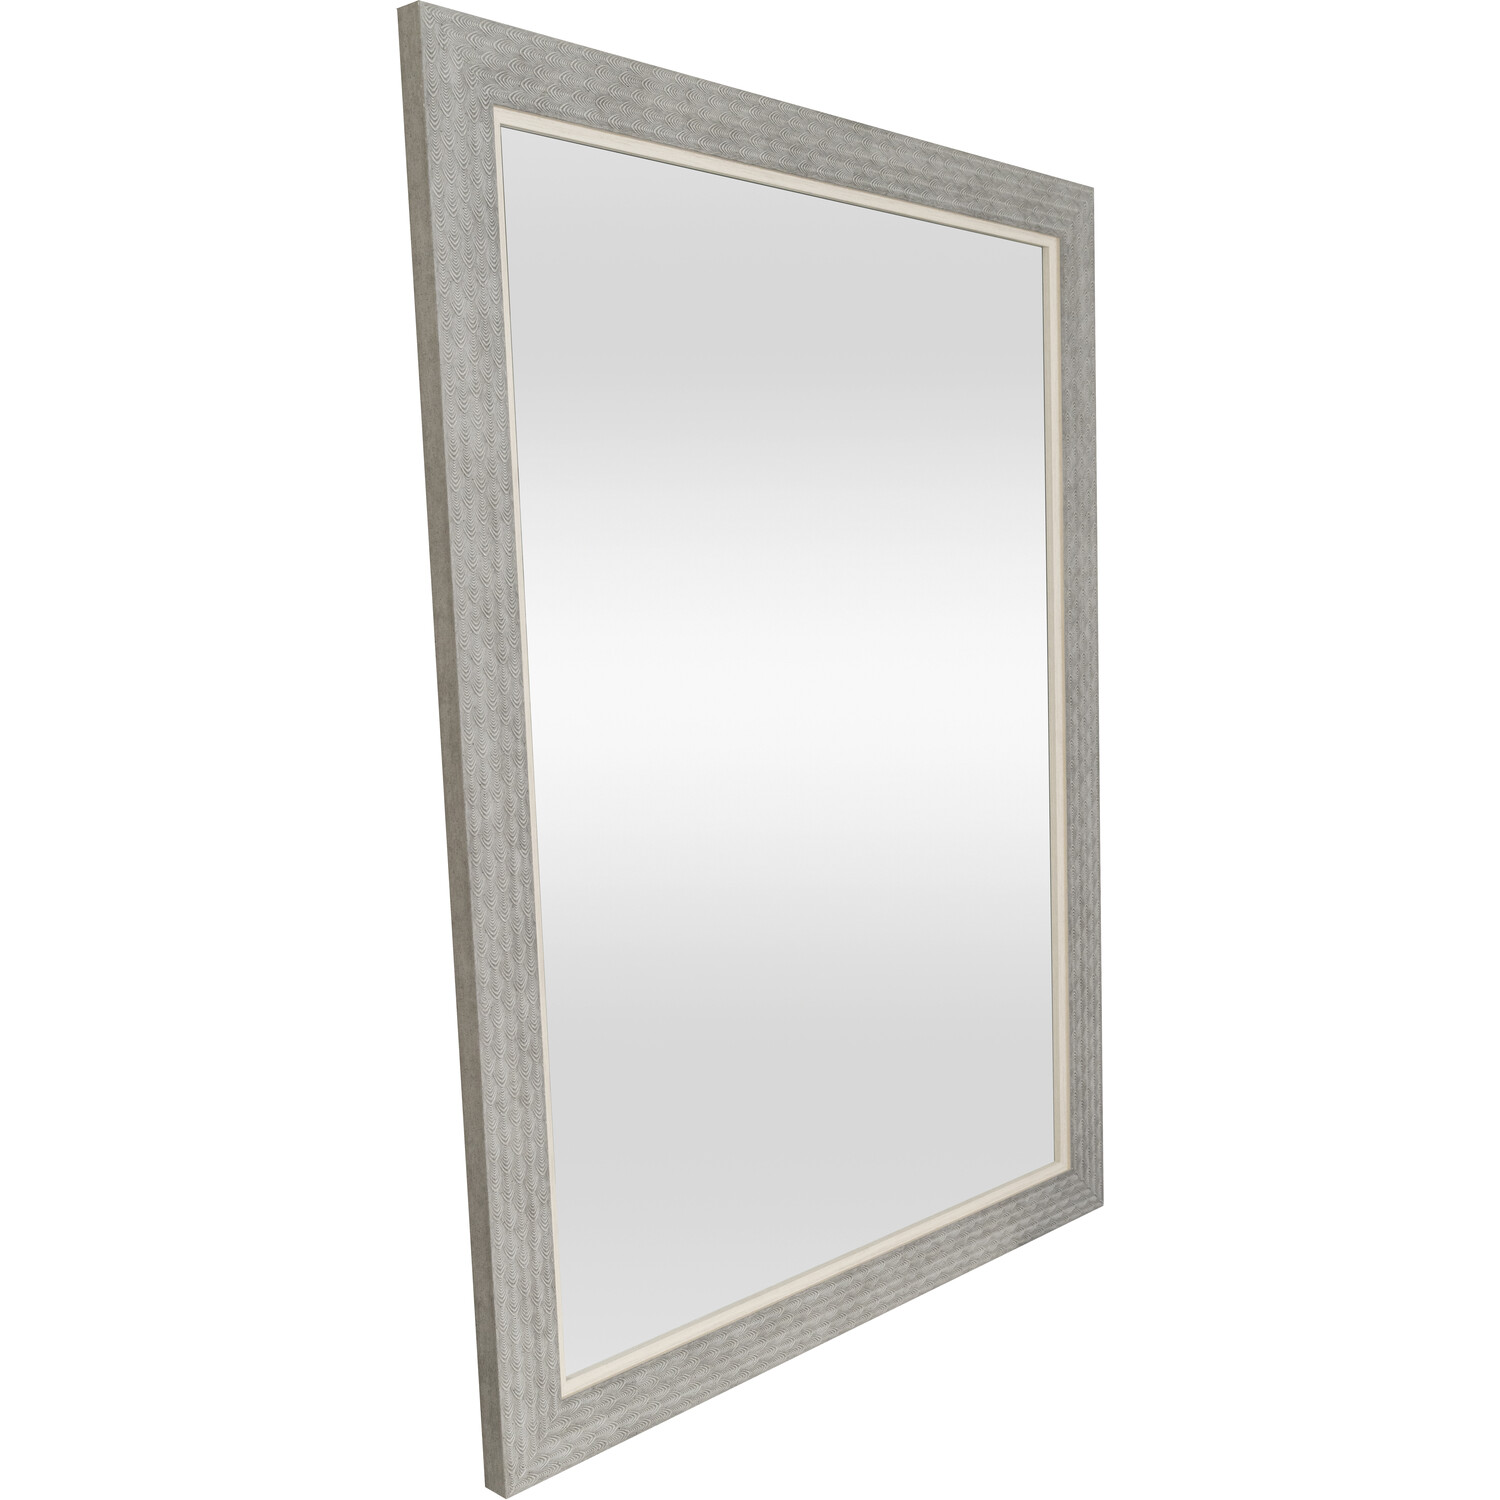 Talia Etched Effect Mirror - Grey Image 3